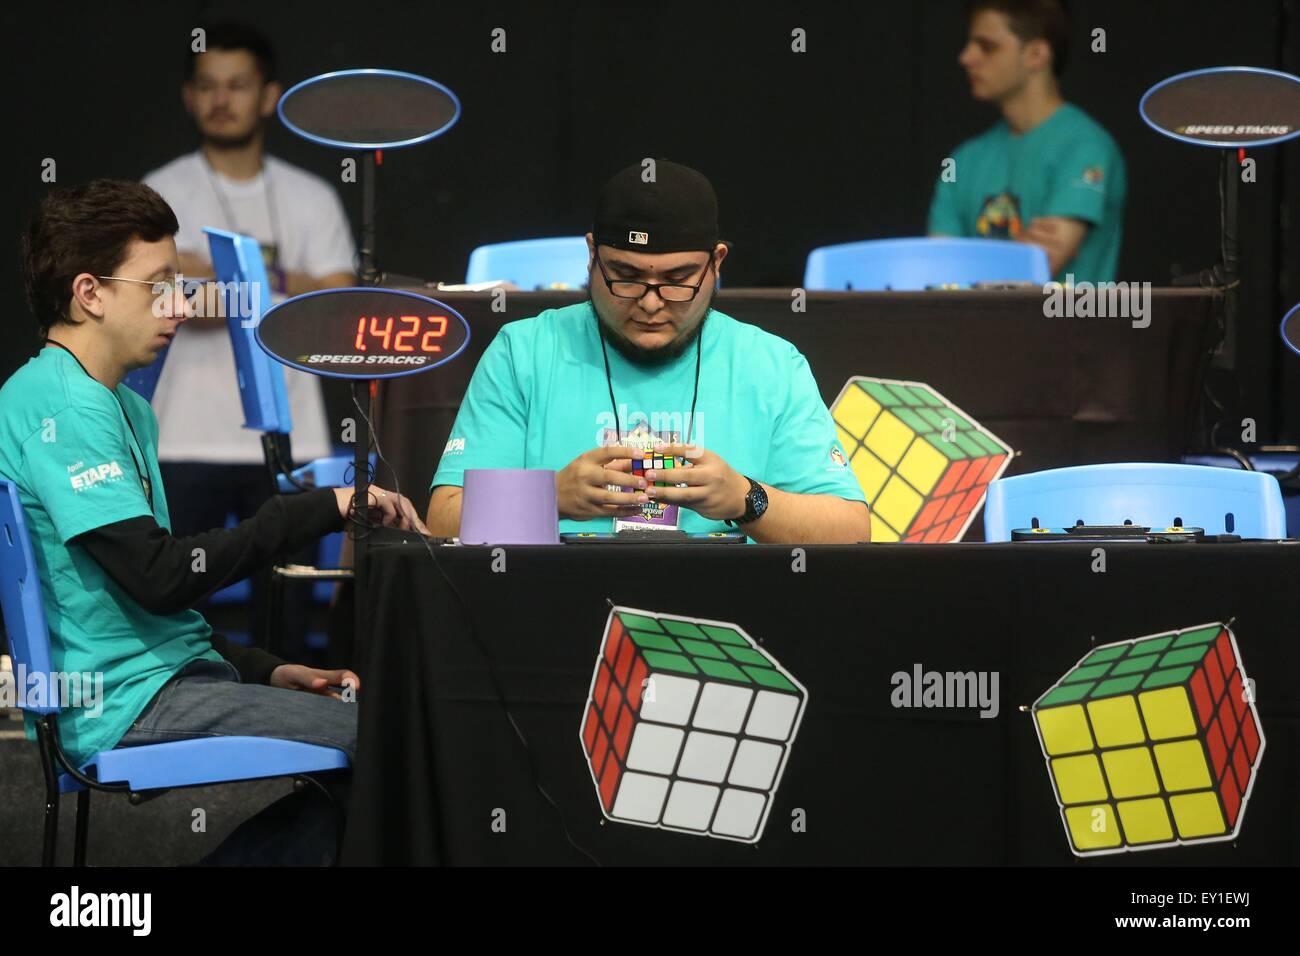 Sao Paulo. 19th July, 2015. Competitors try to solve Rubik's cubes during the 8th Rubik's Cube World Championship in Sao Paulo, Brazil on July 19, 2015. According to local press, around 400 competitors from 40 countries took part in the 2015 event. © Rahel Patrasso/Xinhua/Alamy Live News Stock Photo